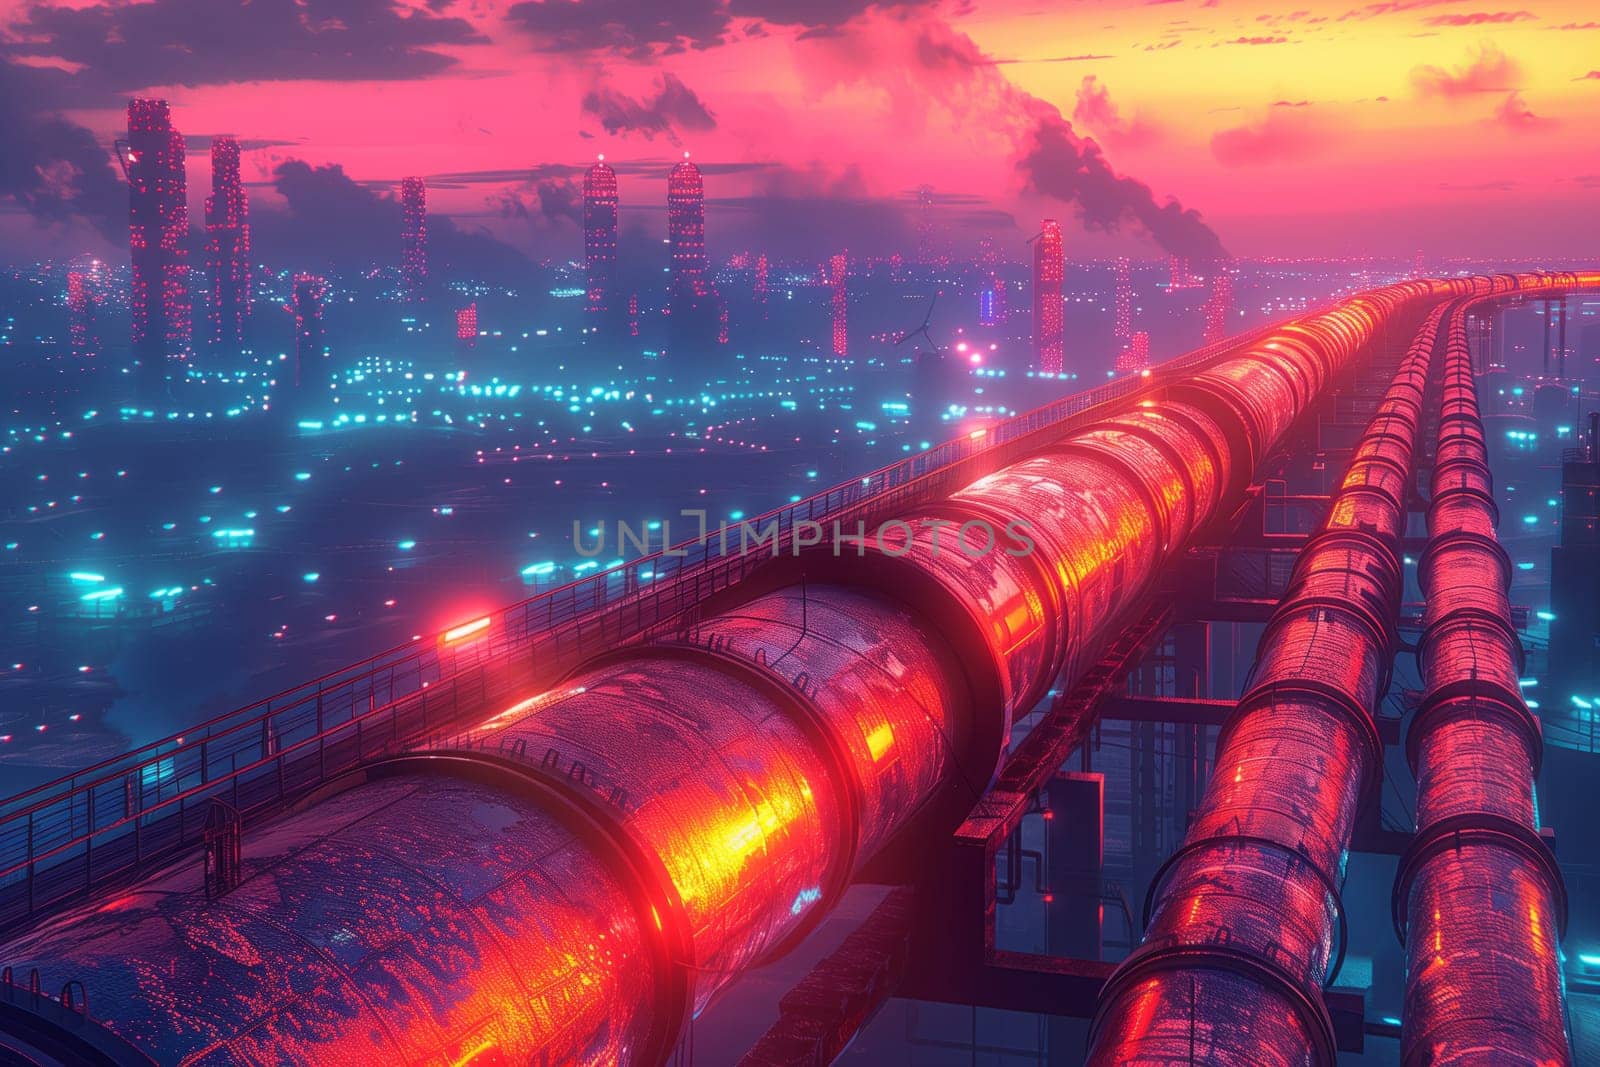 A network of pipes snakes through the city under a magenta sky at night by richwolf